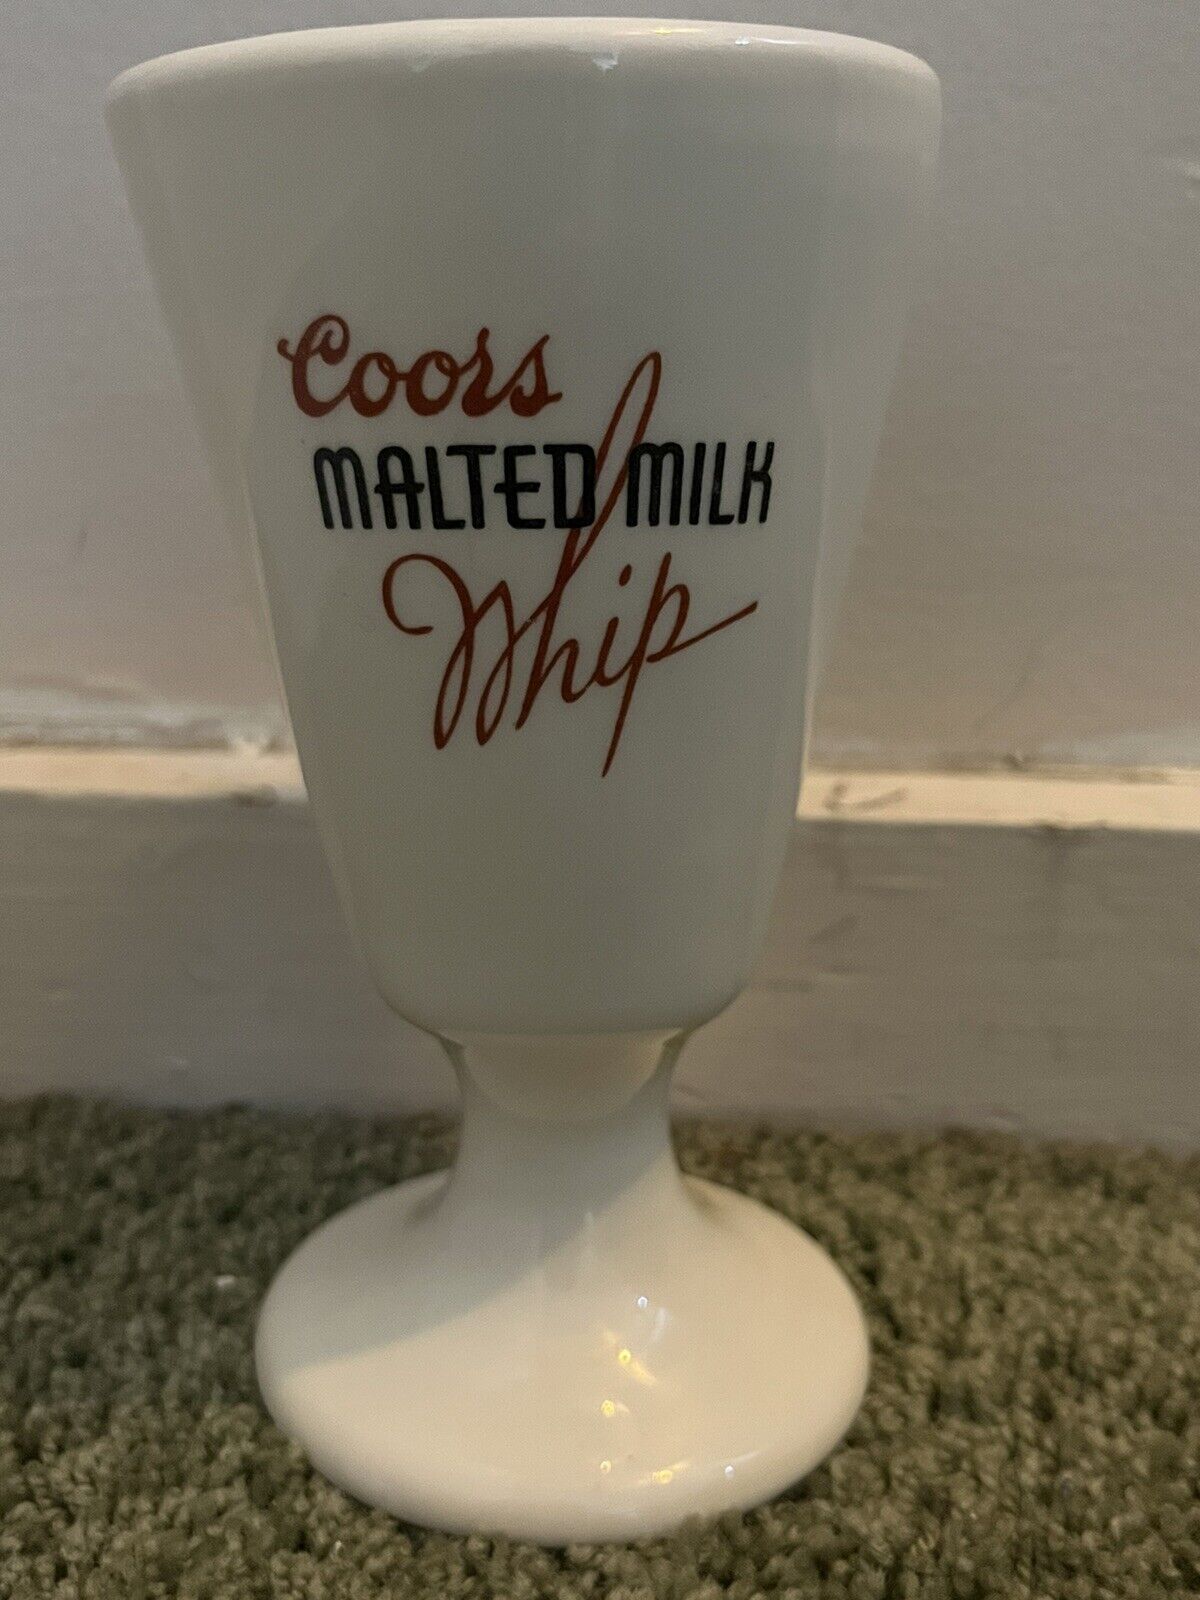 Coors malted milk Whip Thermo Porcelain Soda Fountain Cup